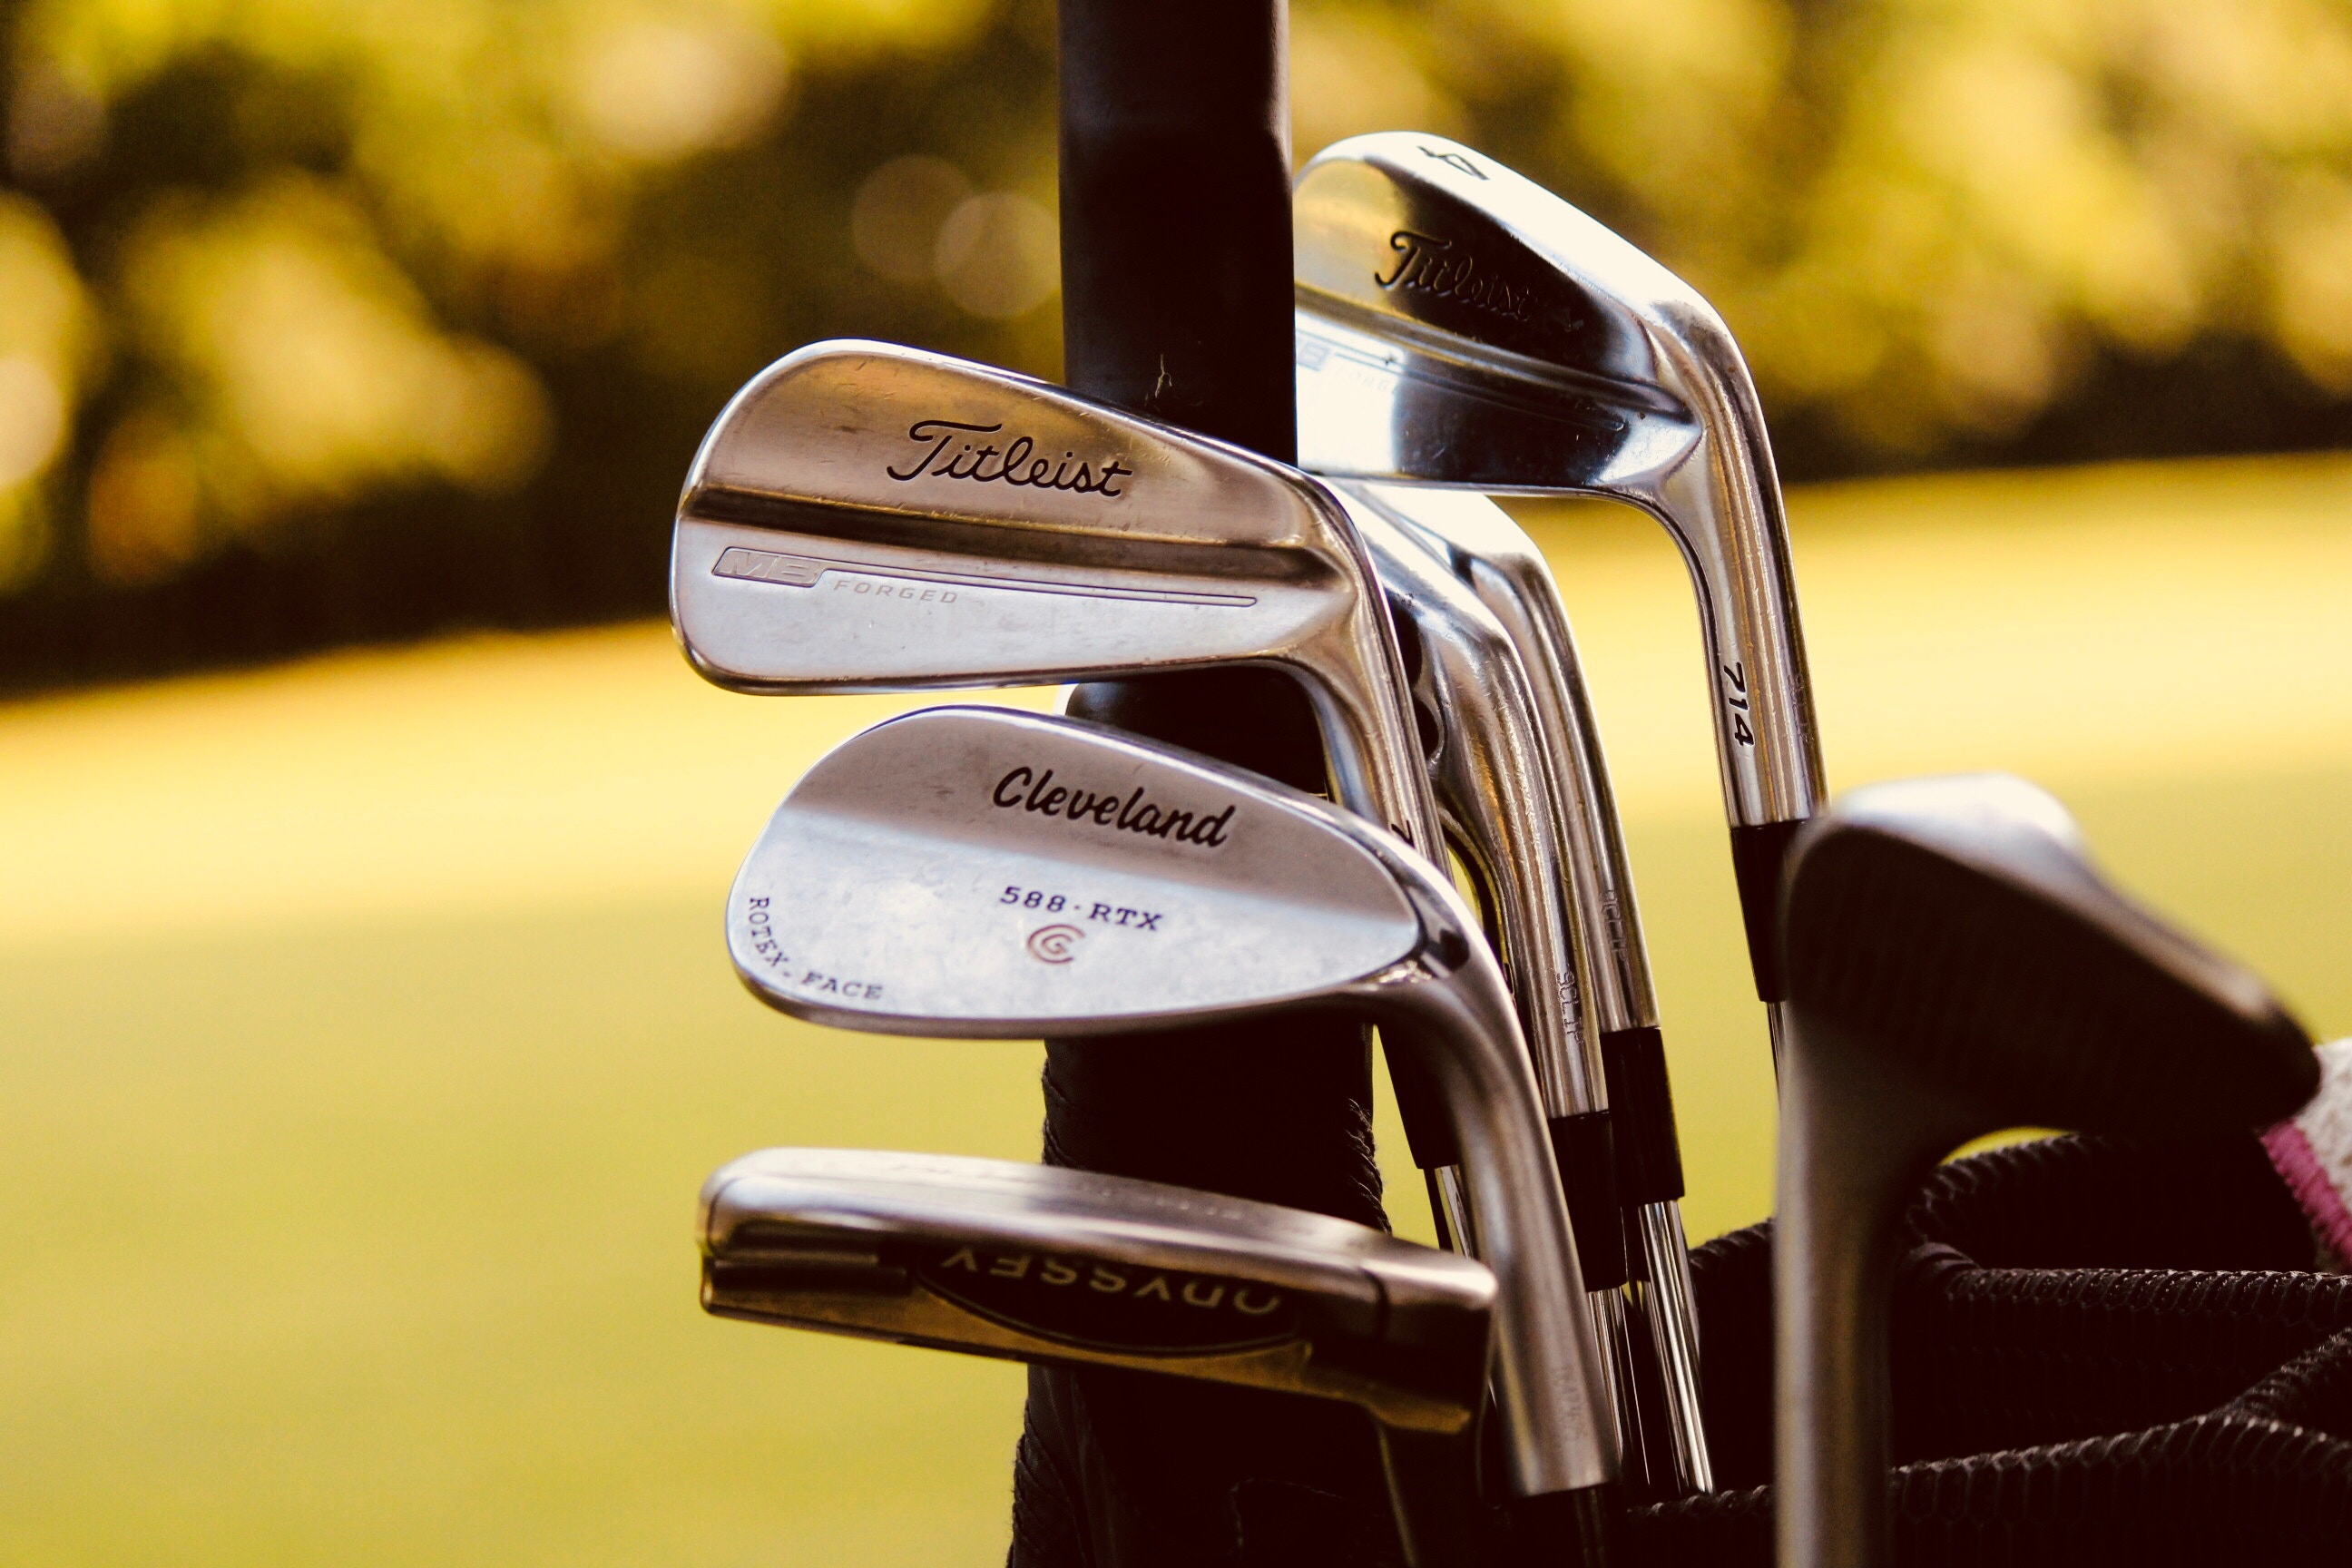 golf clubs to choose from